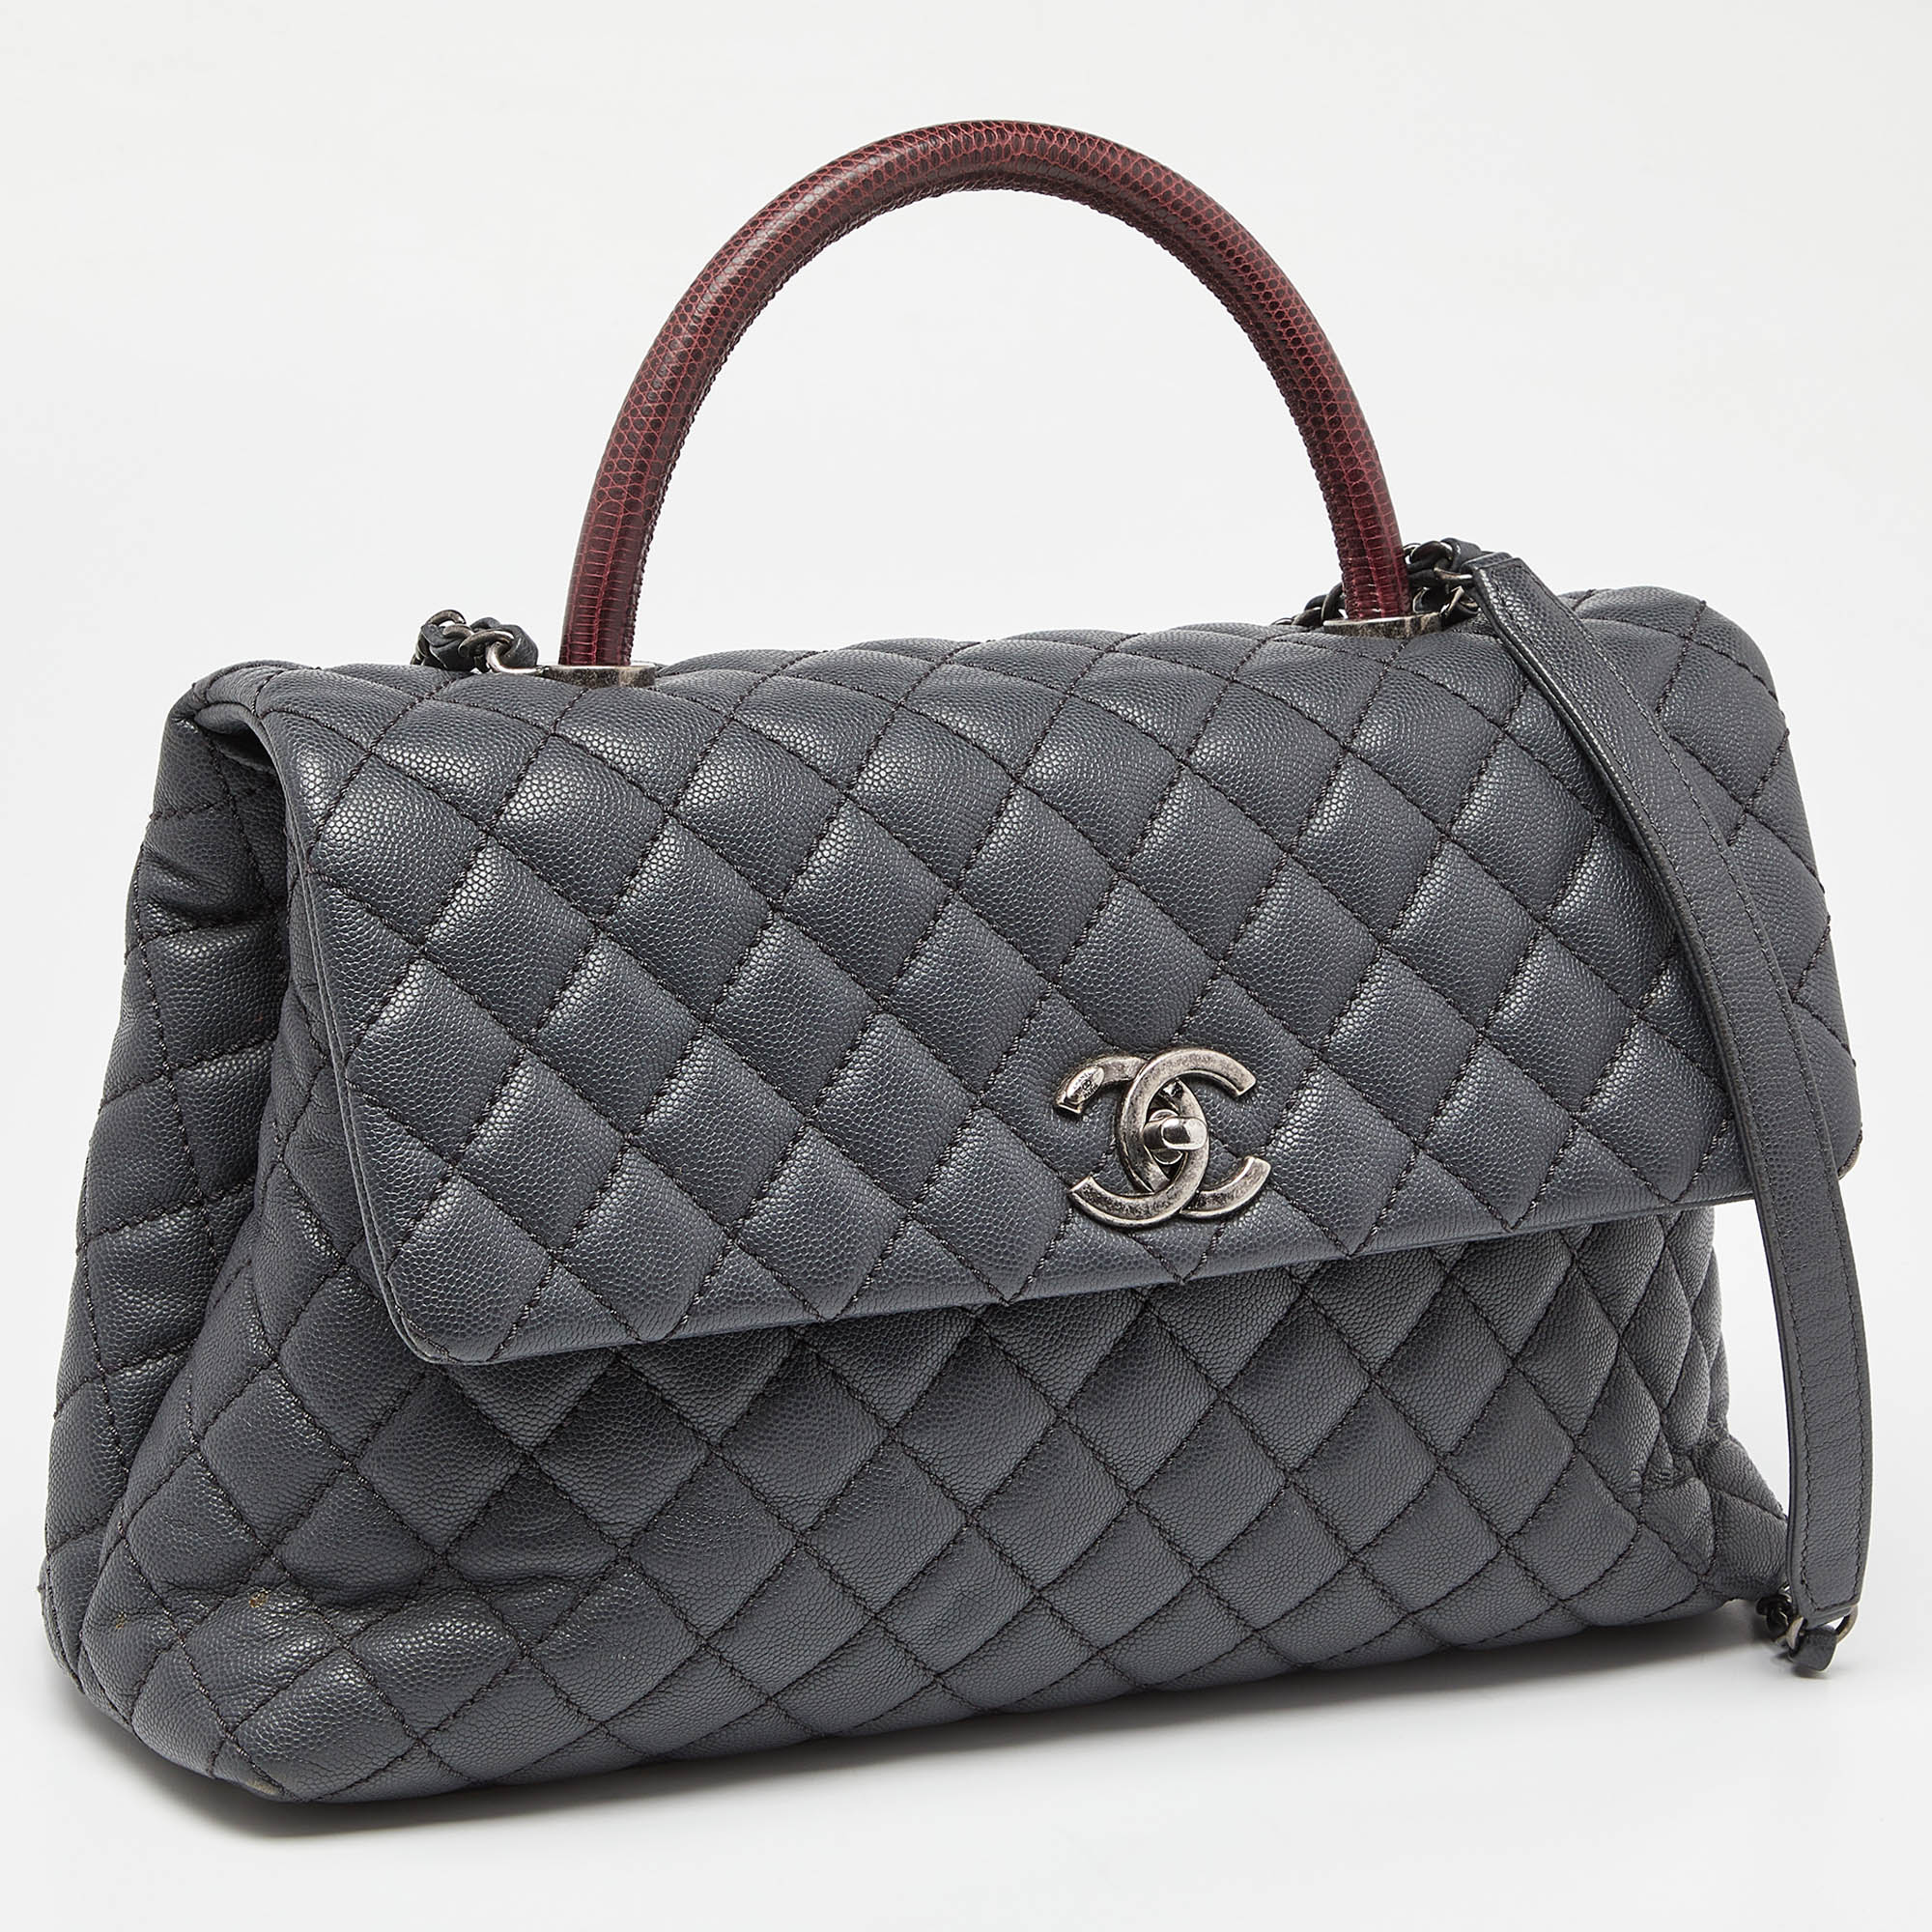 Chanel Grey/Red Caviar Leather And Lizard Leather Medium Coco Top Handle Bag